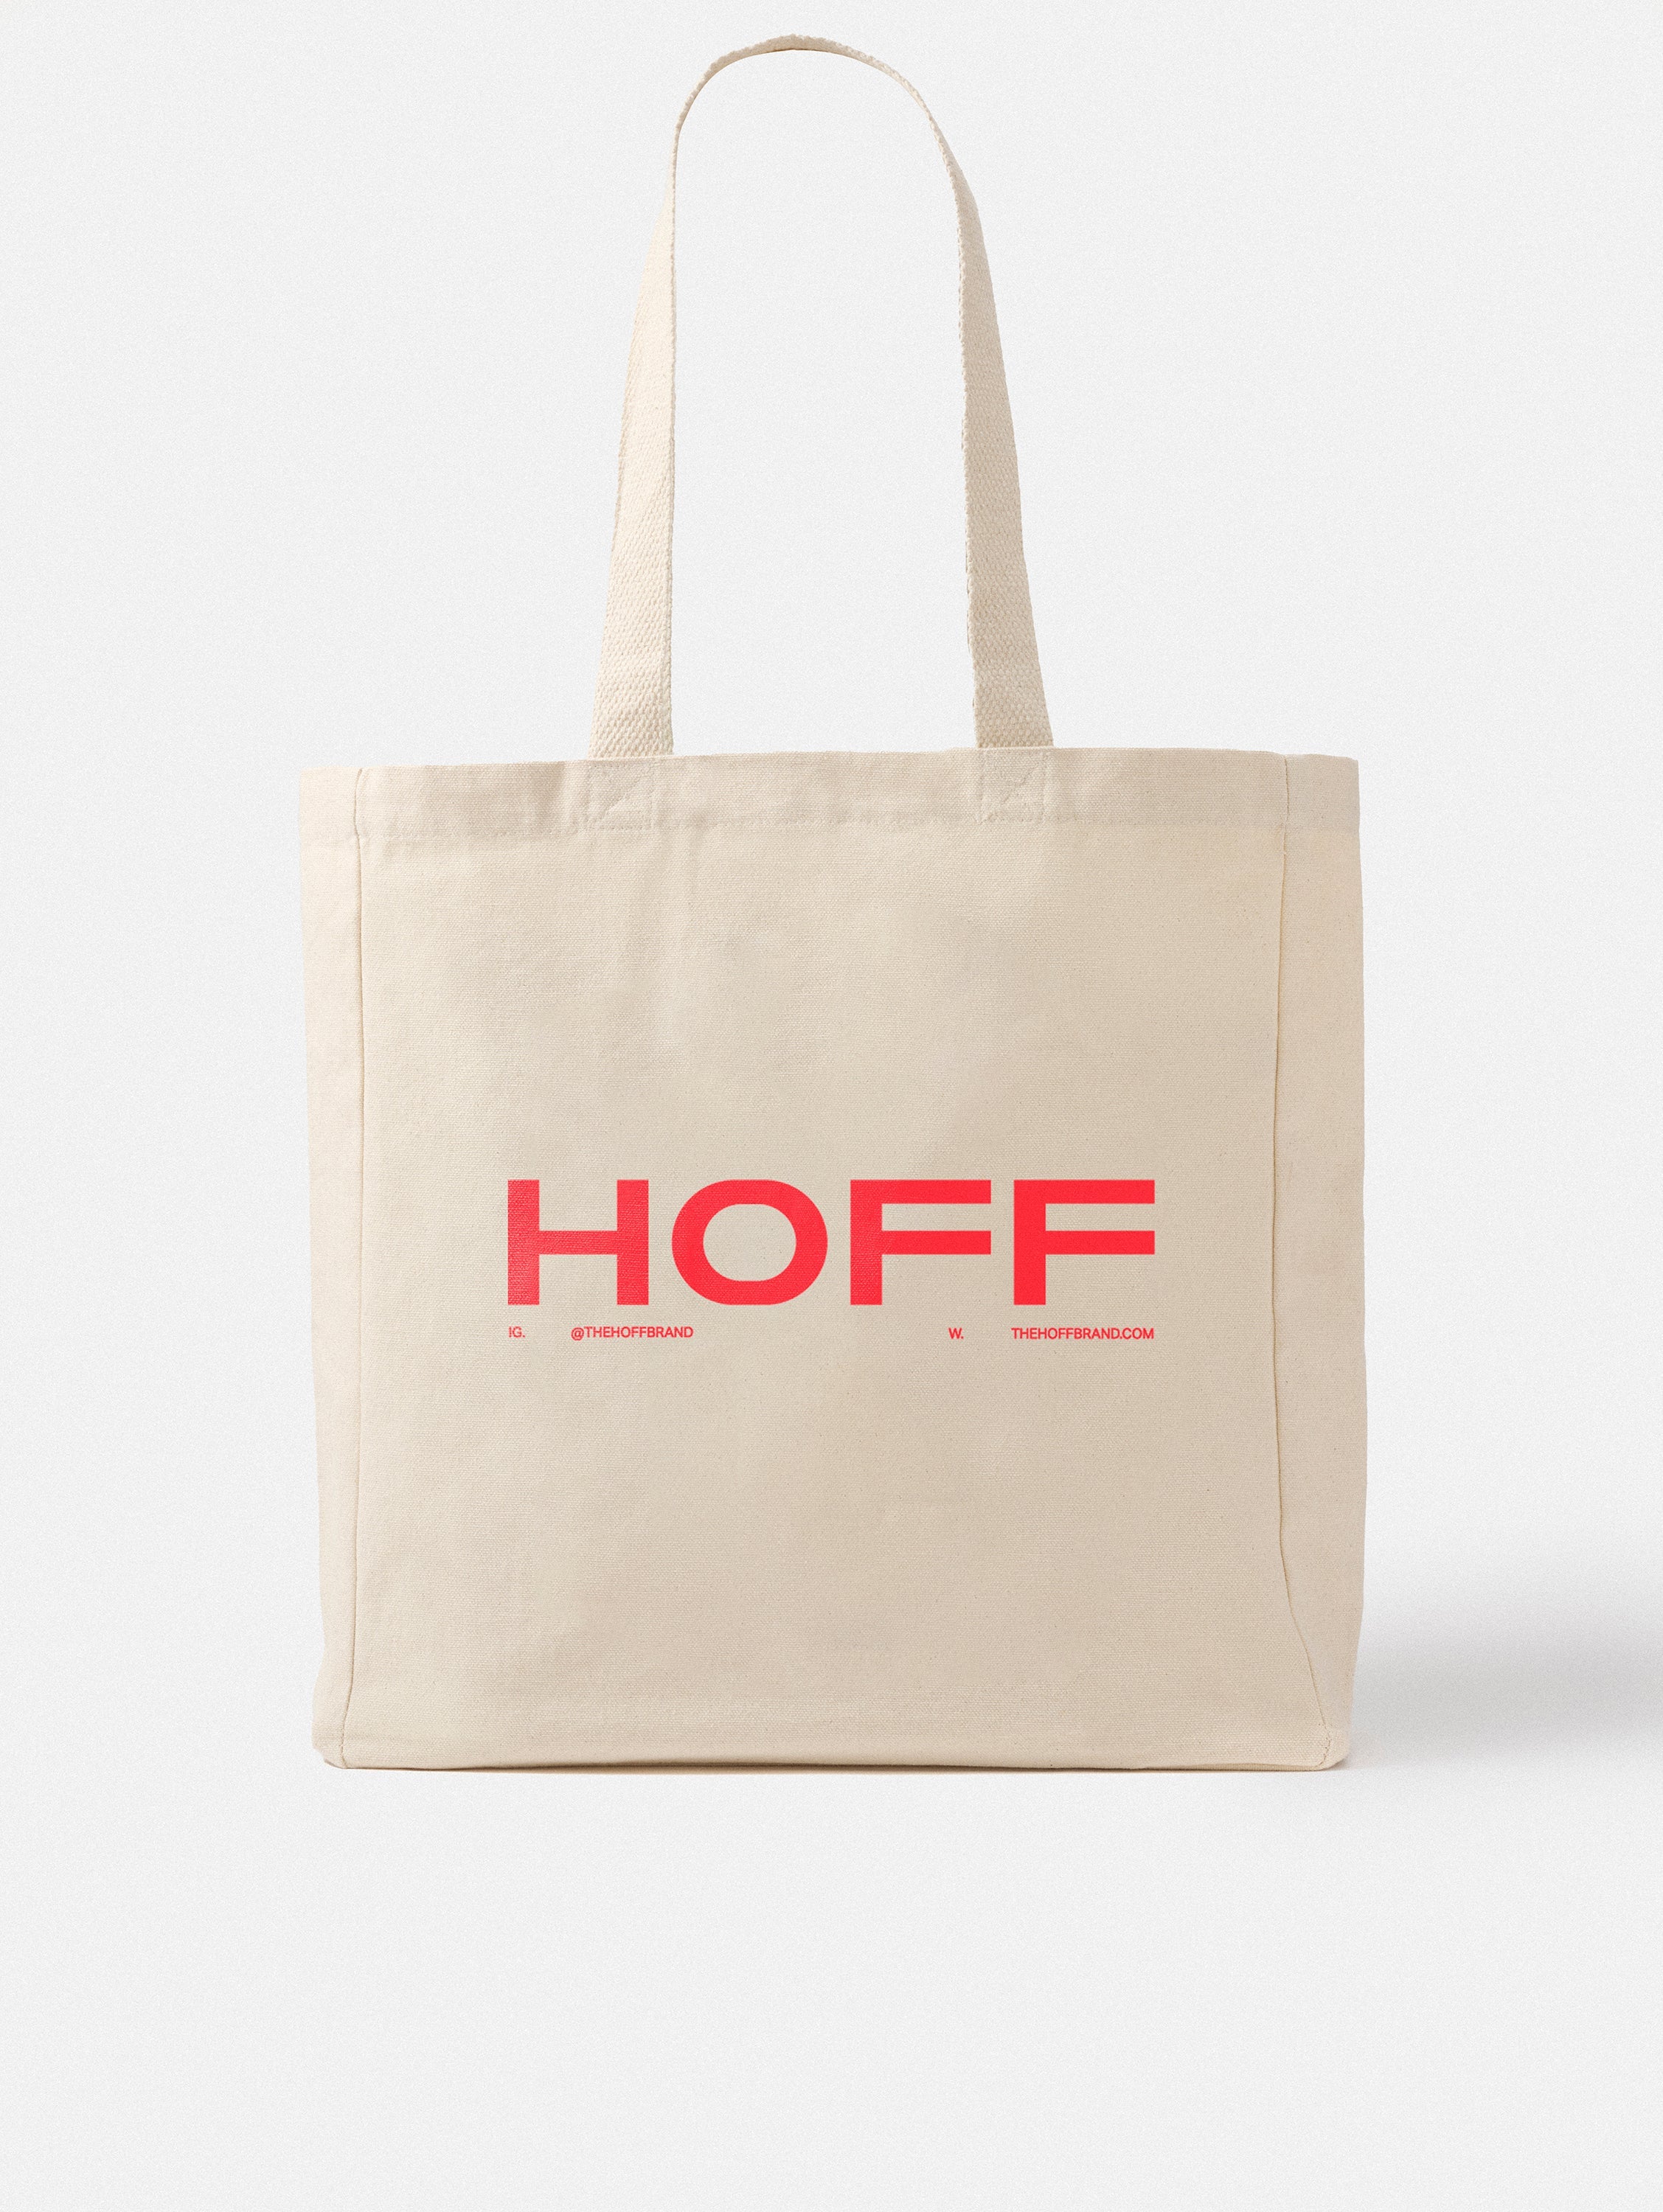 TOTE ART AT FIRST SIGHT (VALENTINE'S DAY EDITION)